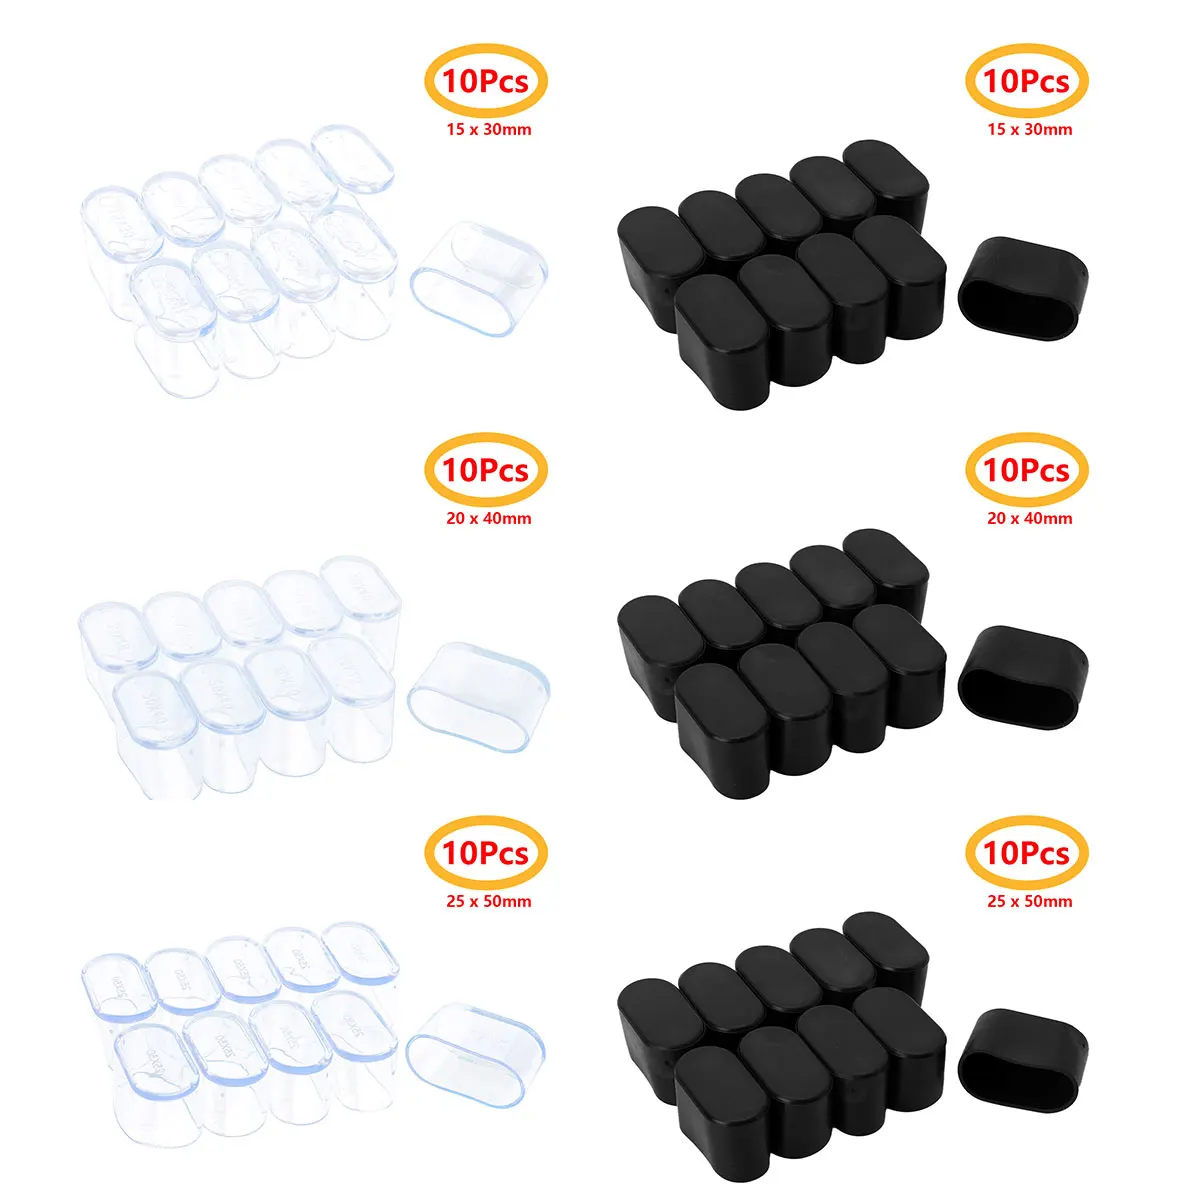 10pcs Rubber Sofa Chair Cups Cap Pad Furniture Table Feet Cover Floor Protector 